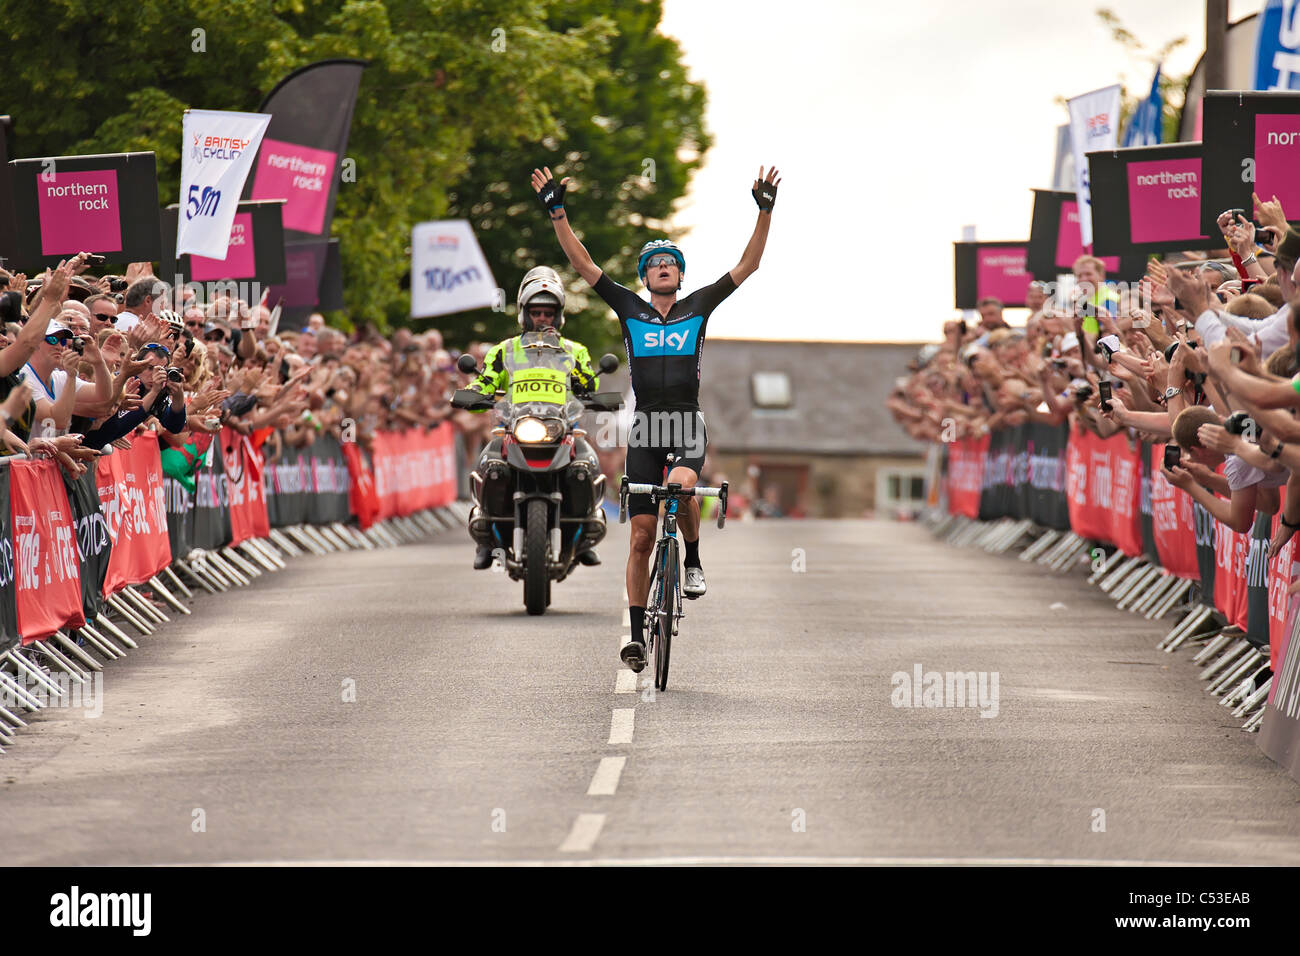 Bradley Wiggins crossing the finish line as the 2011 british road cycling champion Stock Photo